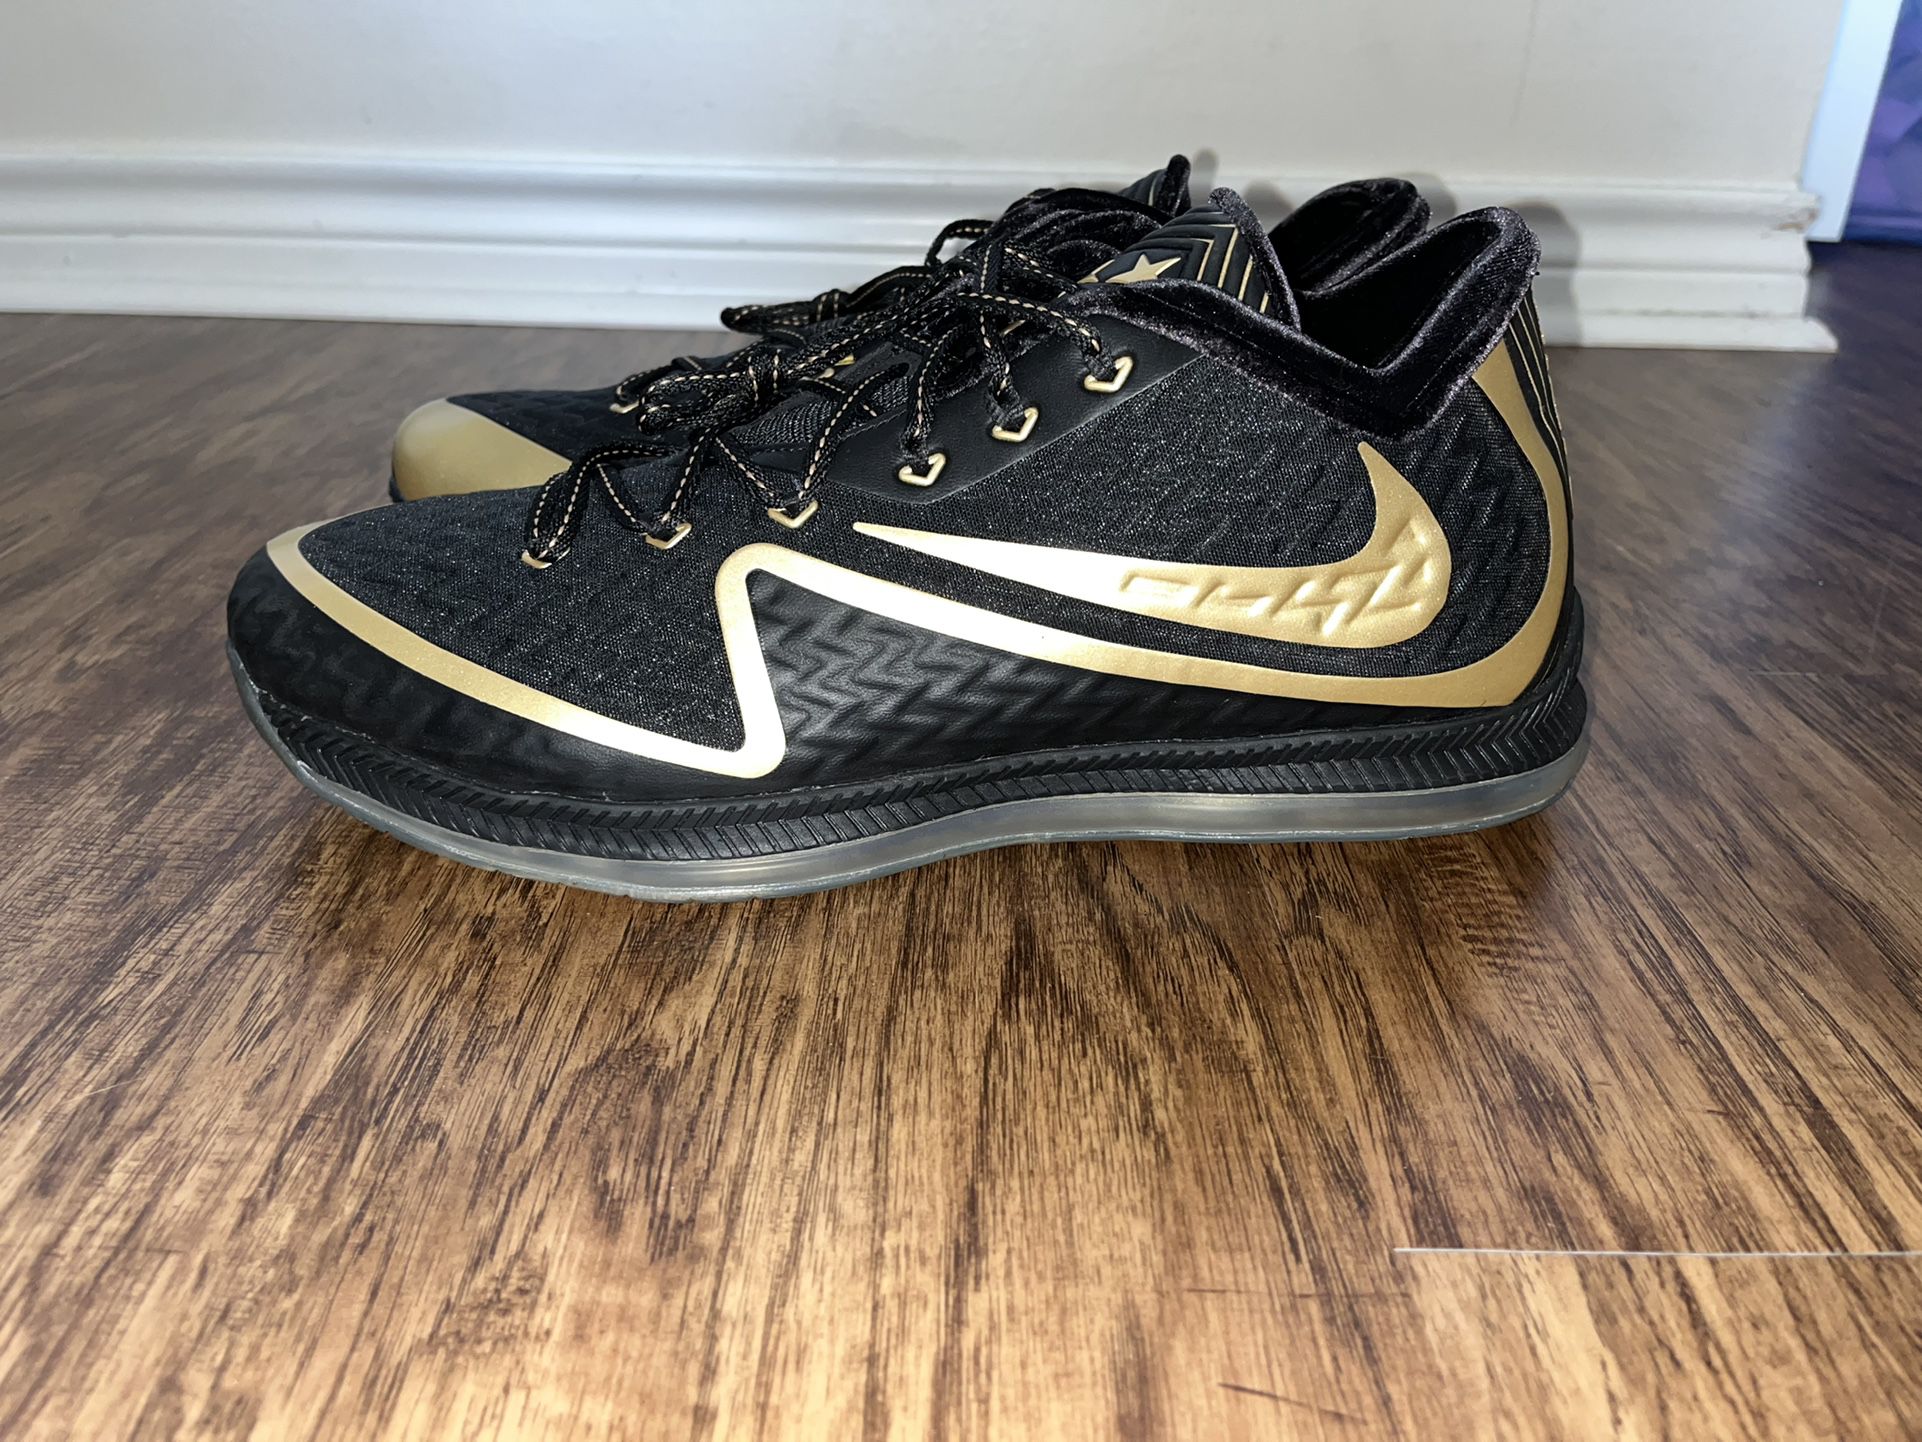 Nike Field General 2 Super Bowl 50 Premium Black and Gold for Sale in Station, TX -